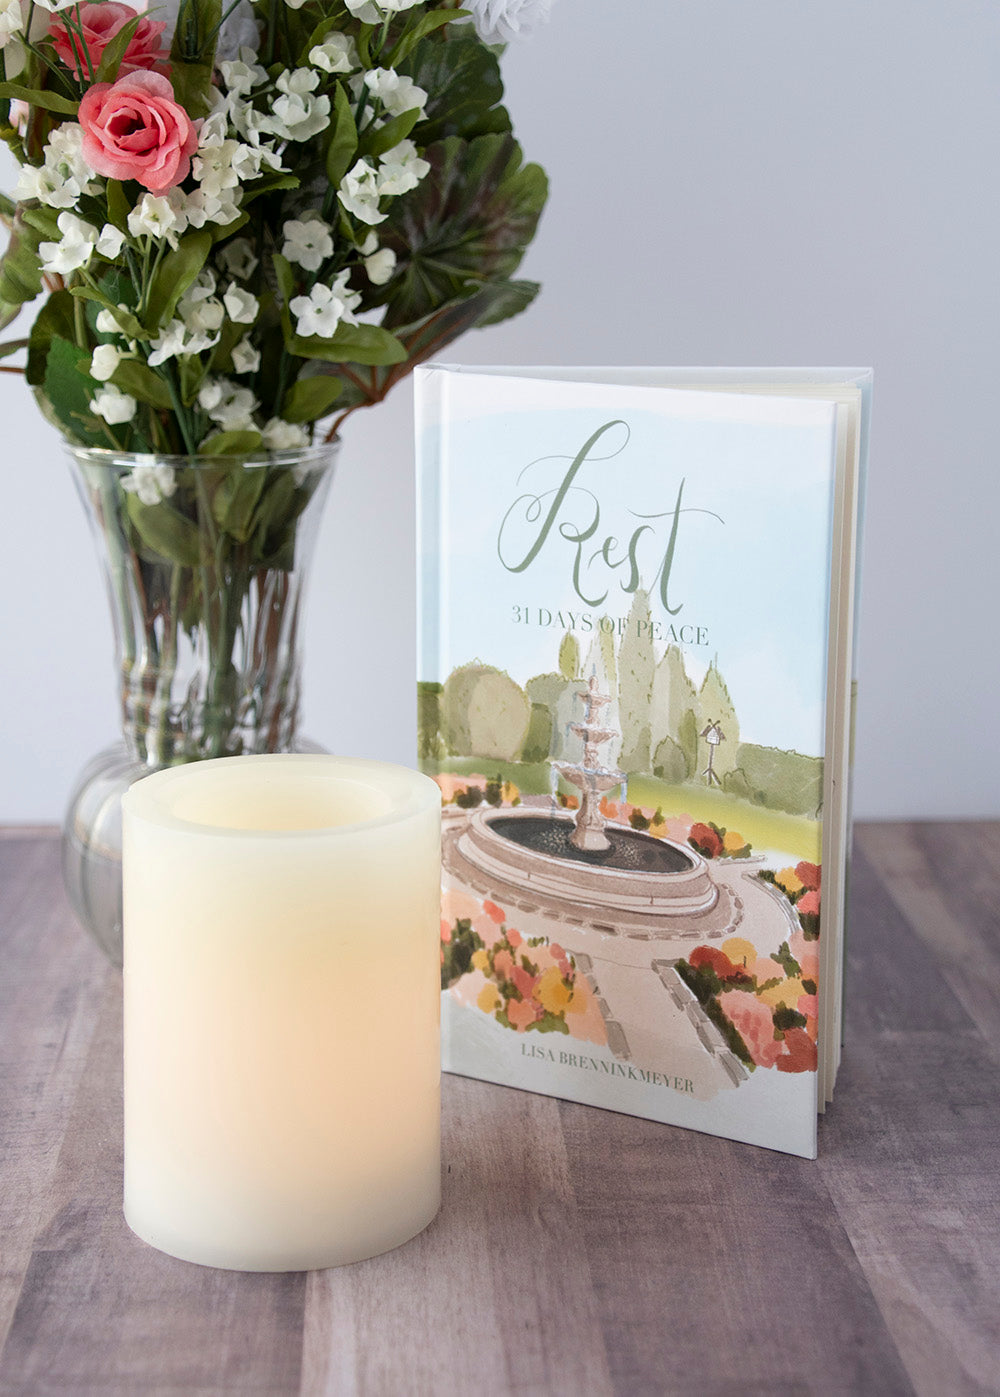 Rest: 31 Days of Peace Devotional with candle and flowers